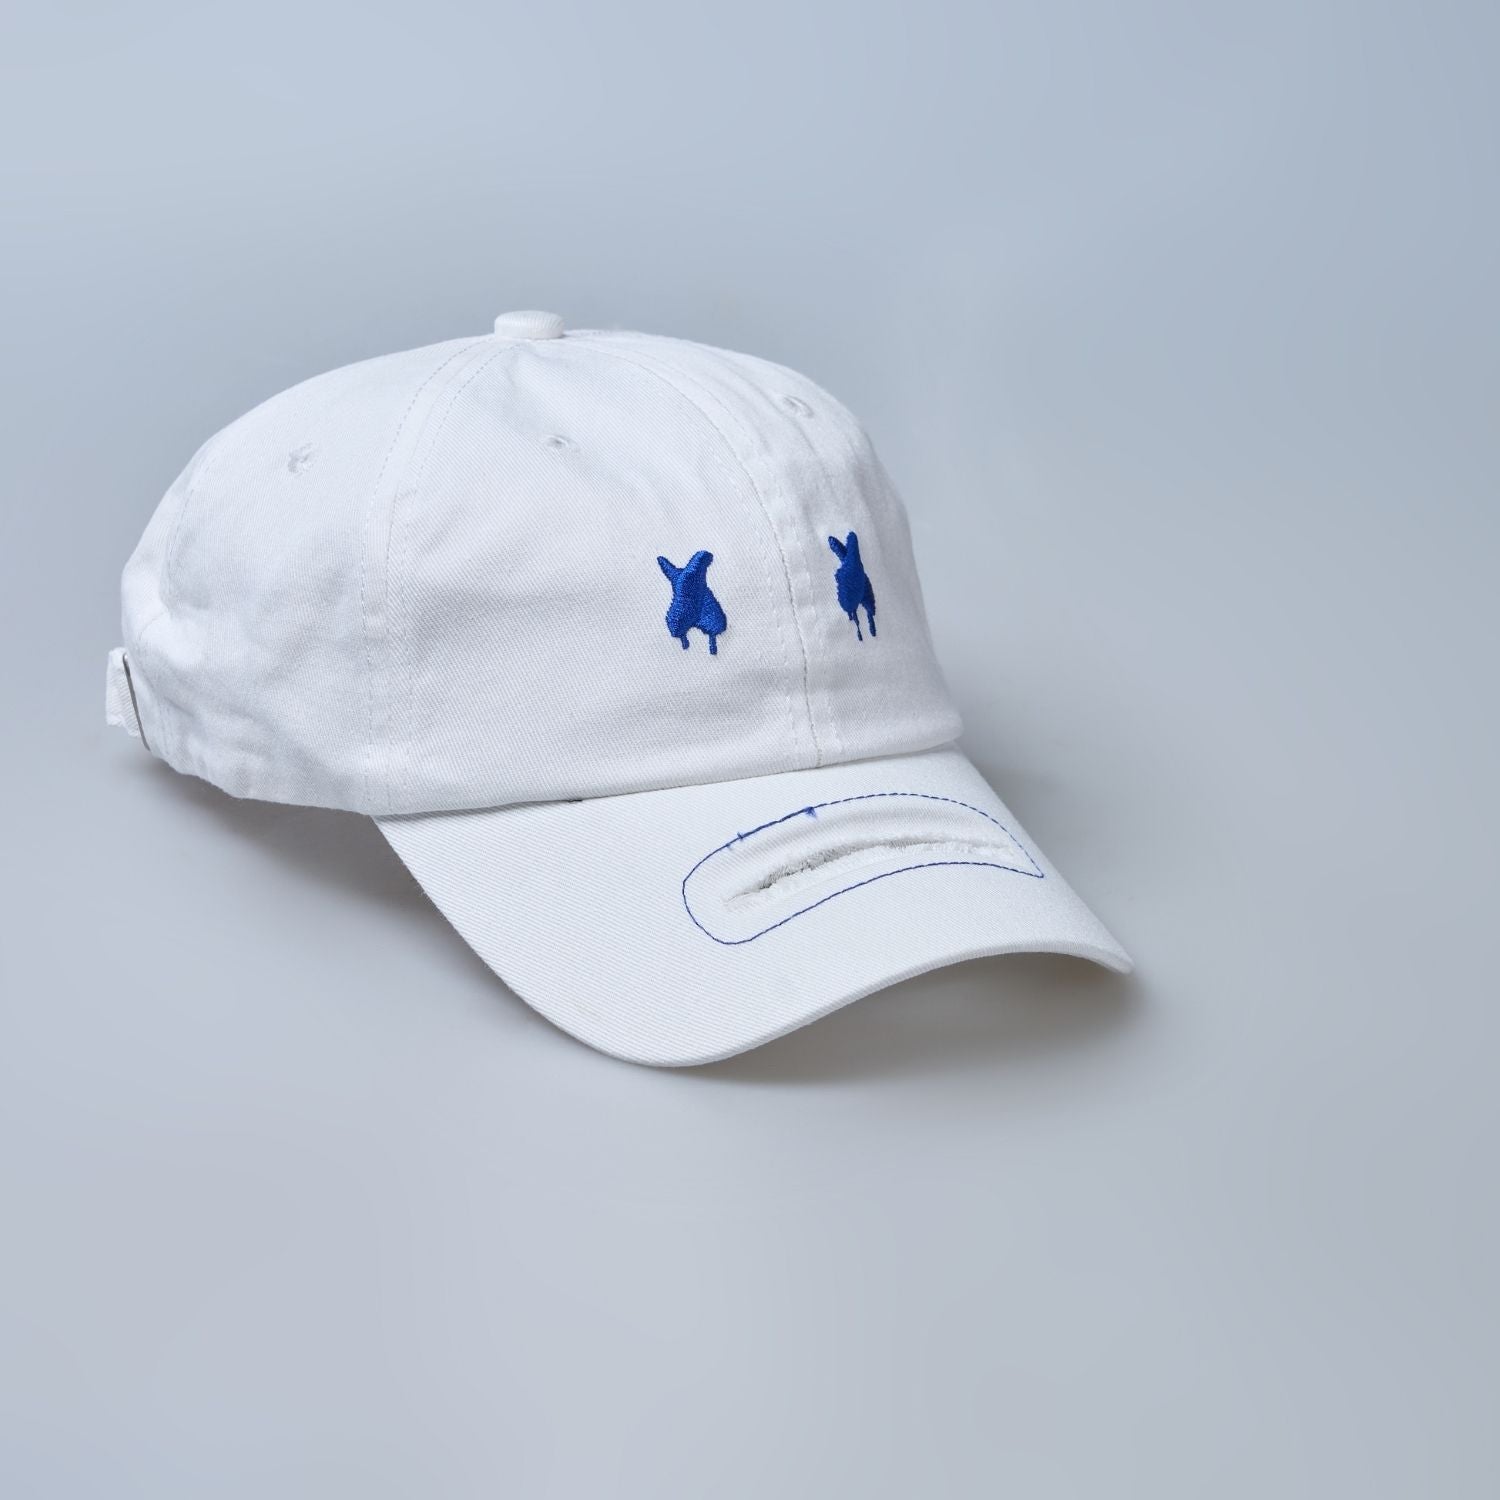 white colored, solid cap for men.